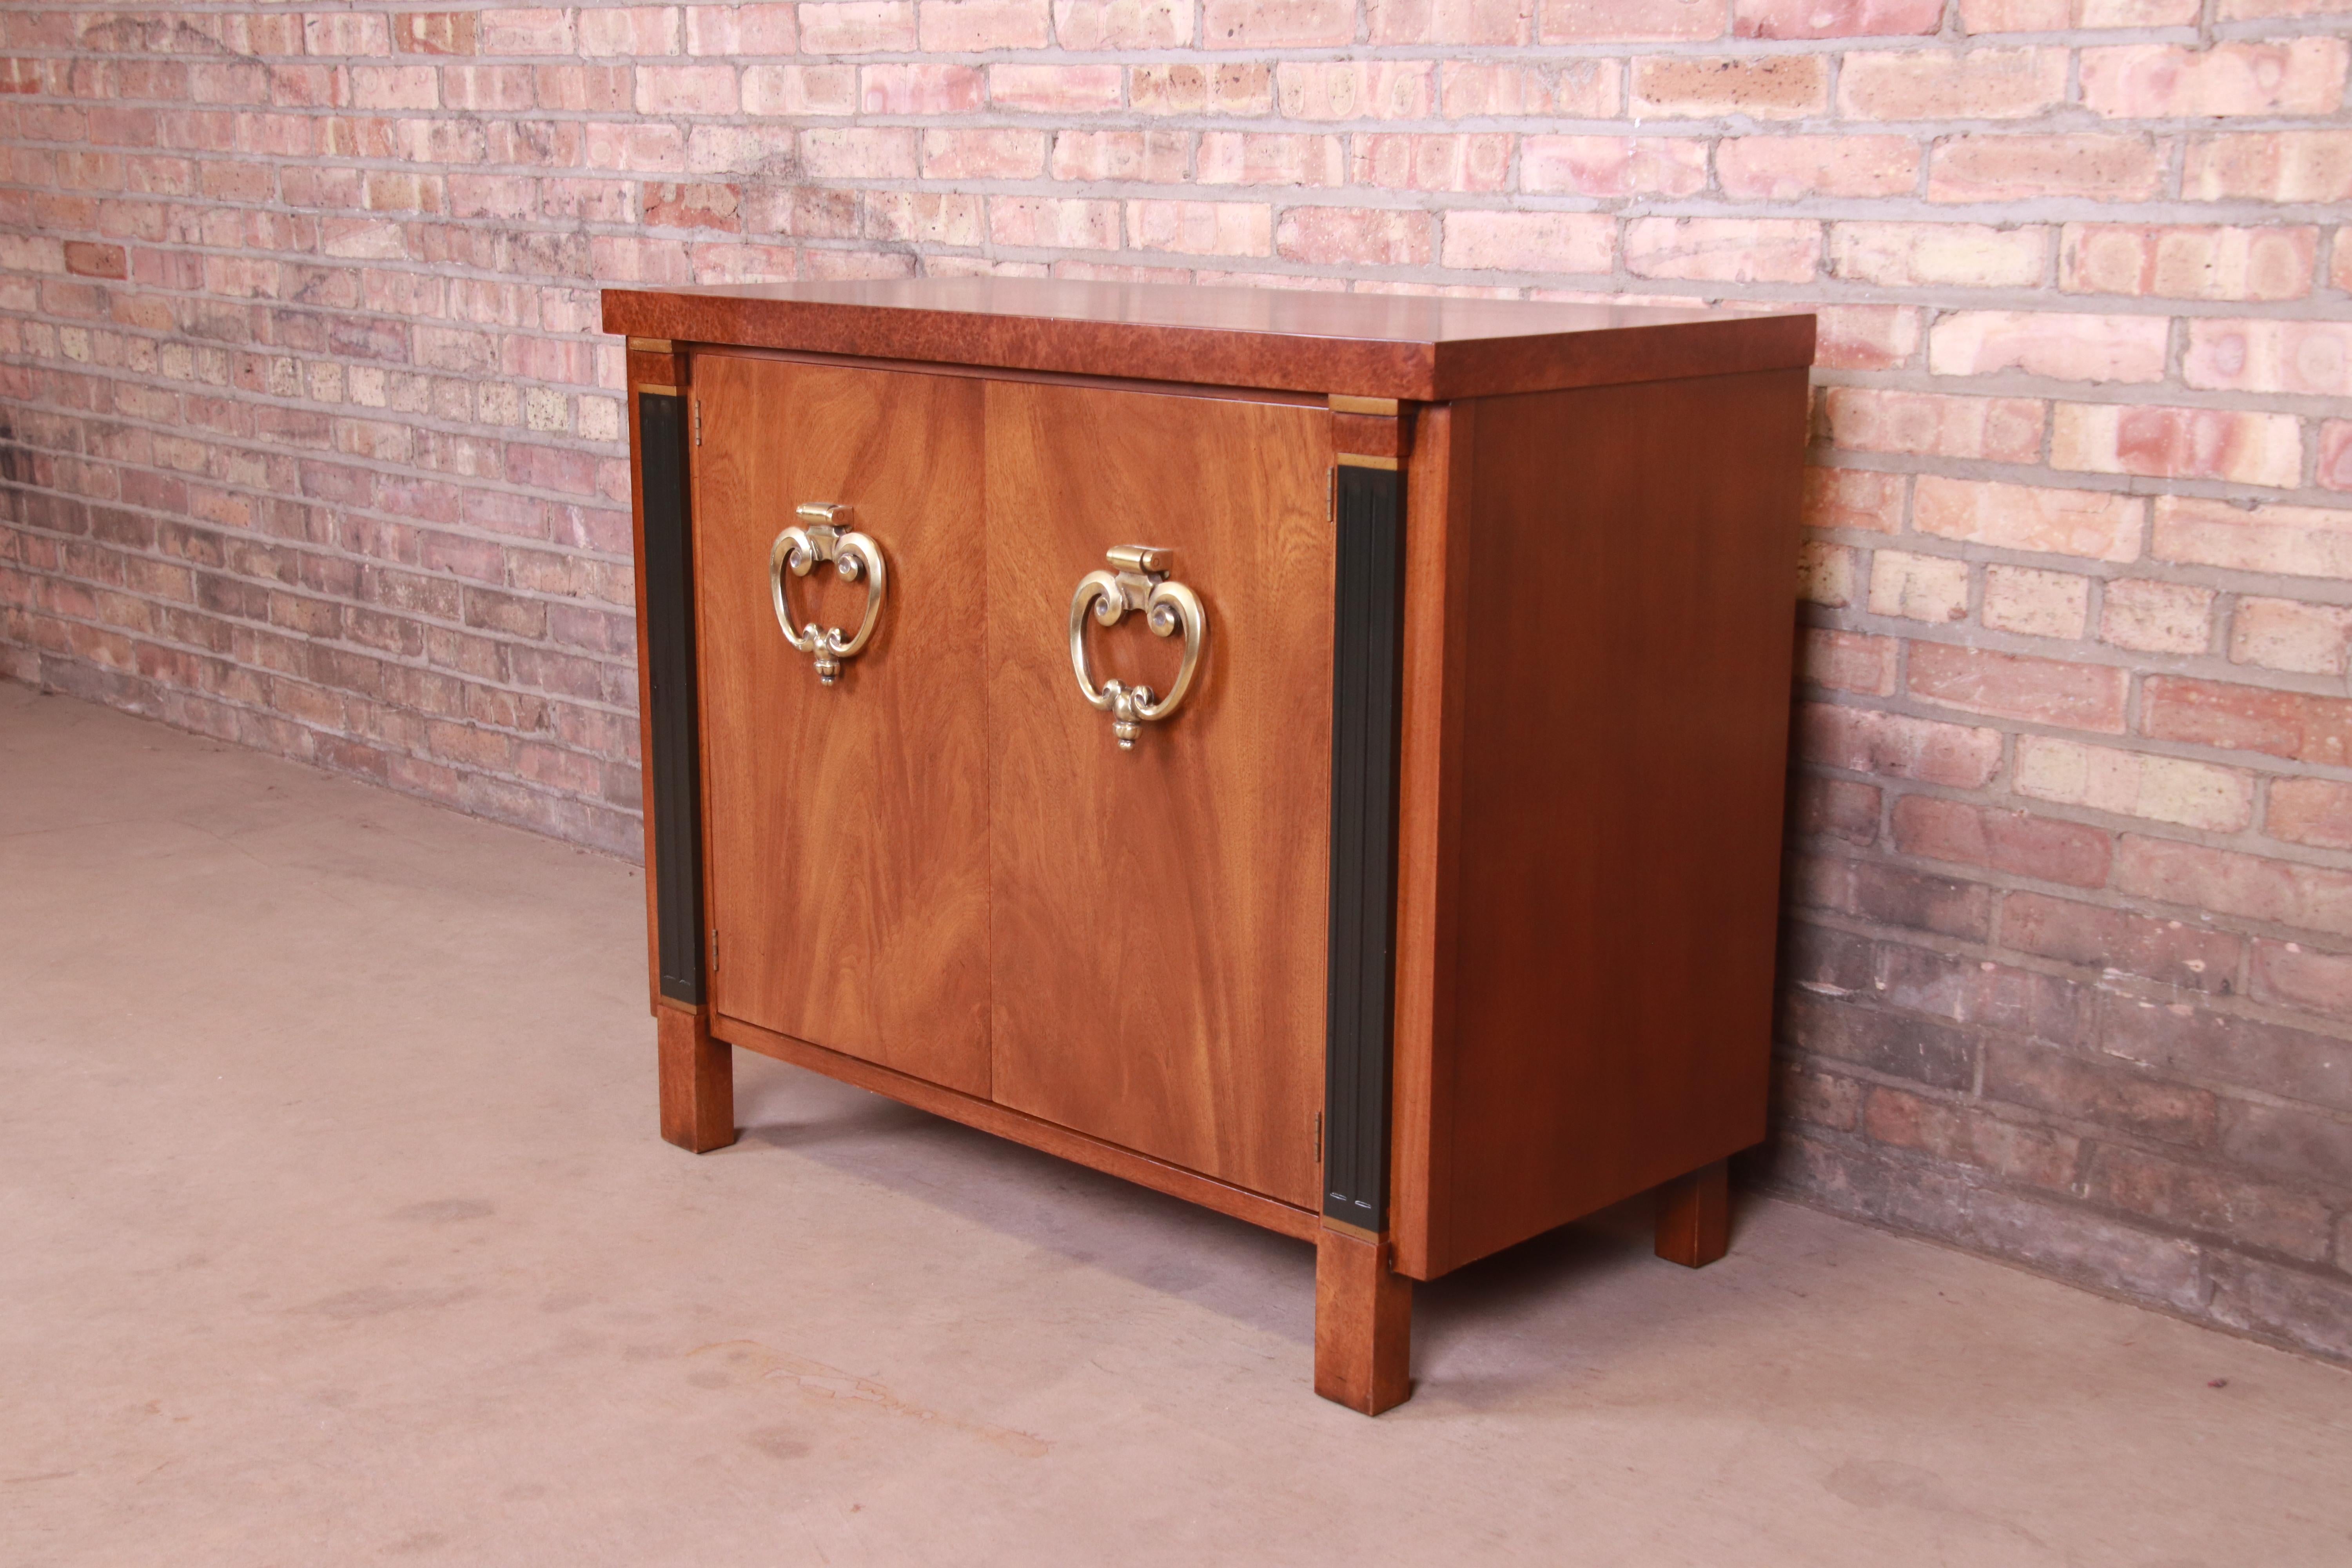 An outstanding mid-century Hollywood Regency buffet server, compact credenza, or bar cabinet

Produced by Johnson Furniture for John Stuart

USA, Circa 1960s

Book-matched walnut, with burled walnut trim, ebonized columns, and original brass